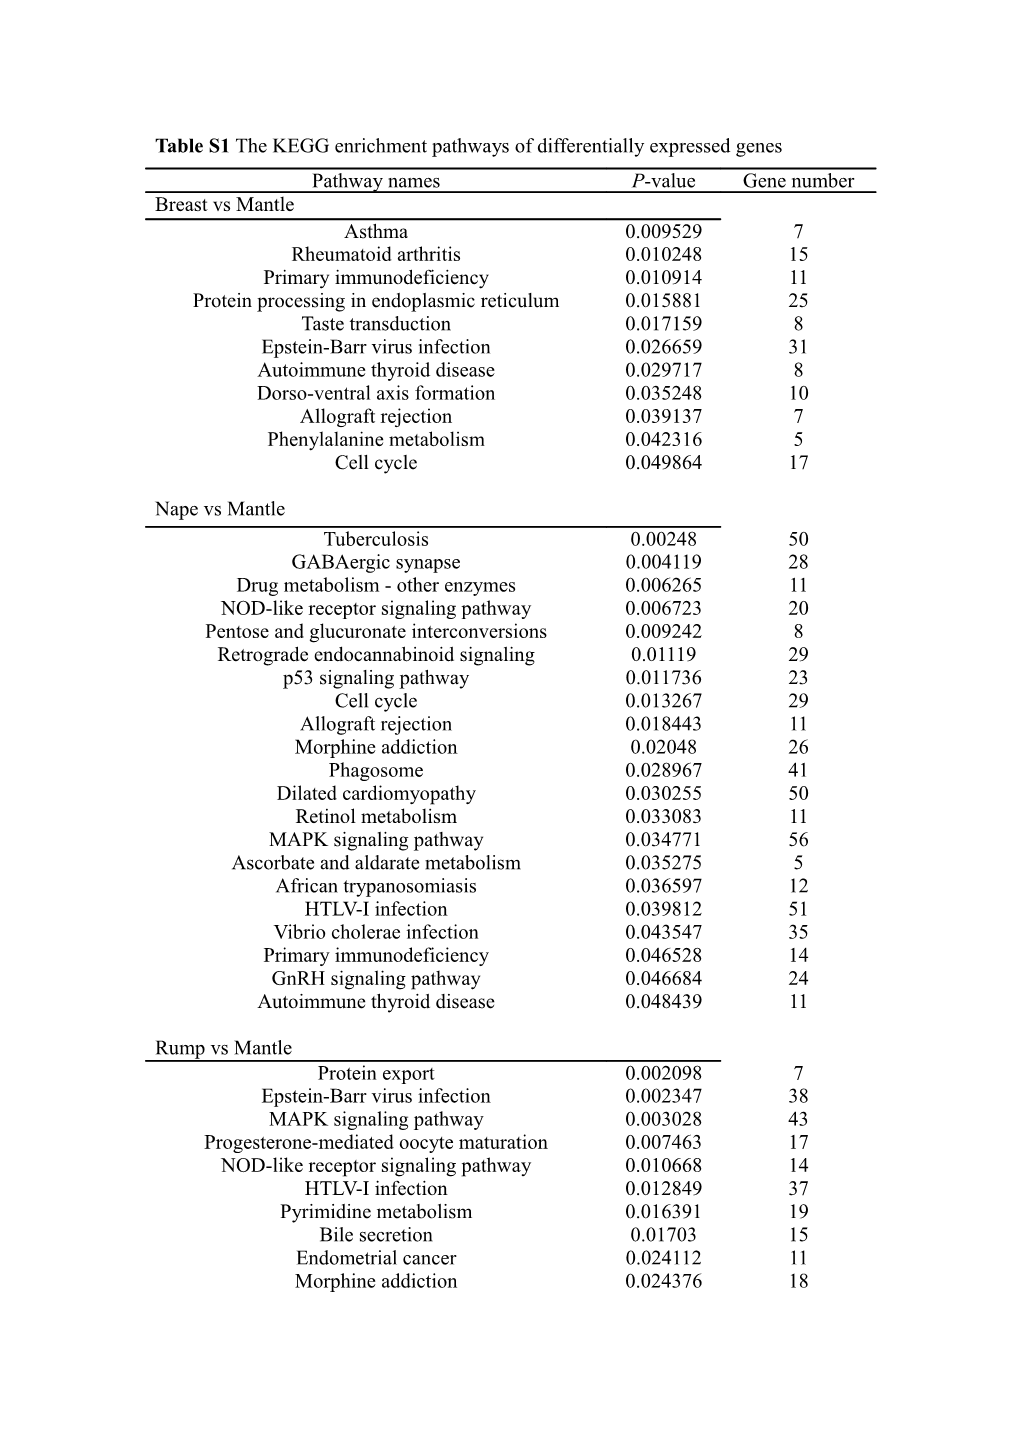 Table S1 the KEGG Enrichment Pathways of Differentially Expressed Genes